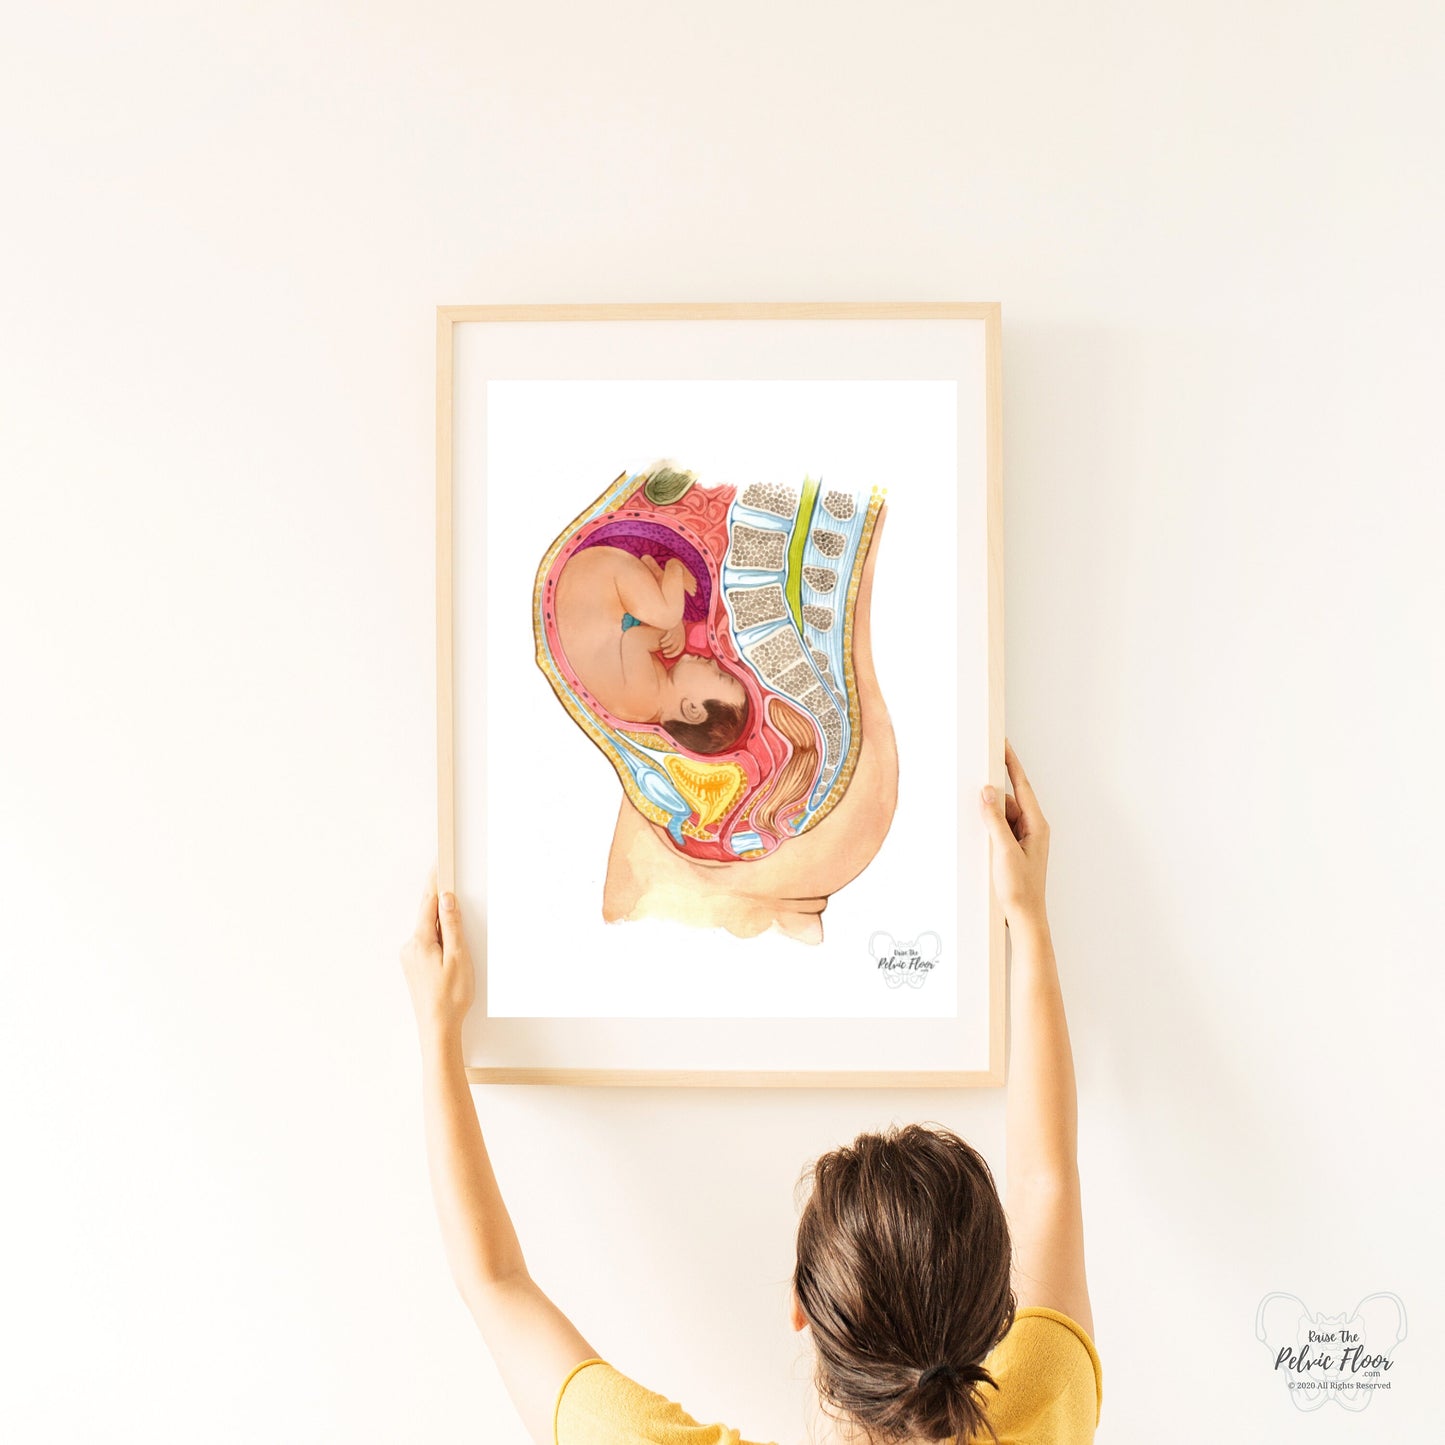 Pregnant Fetus In Womb Art Medical Office Decor | Pelvic Floor, Lumbar spine, Baby, Bladder | Physical Therapist, OBGYN, RN Doula, Midwife